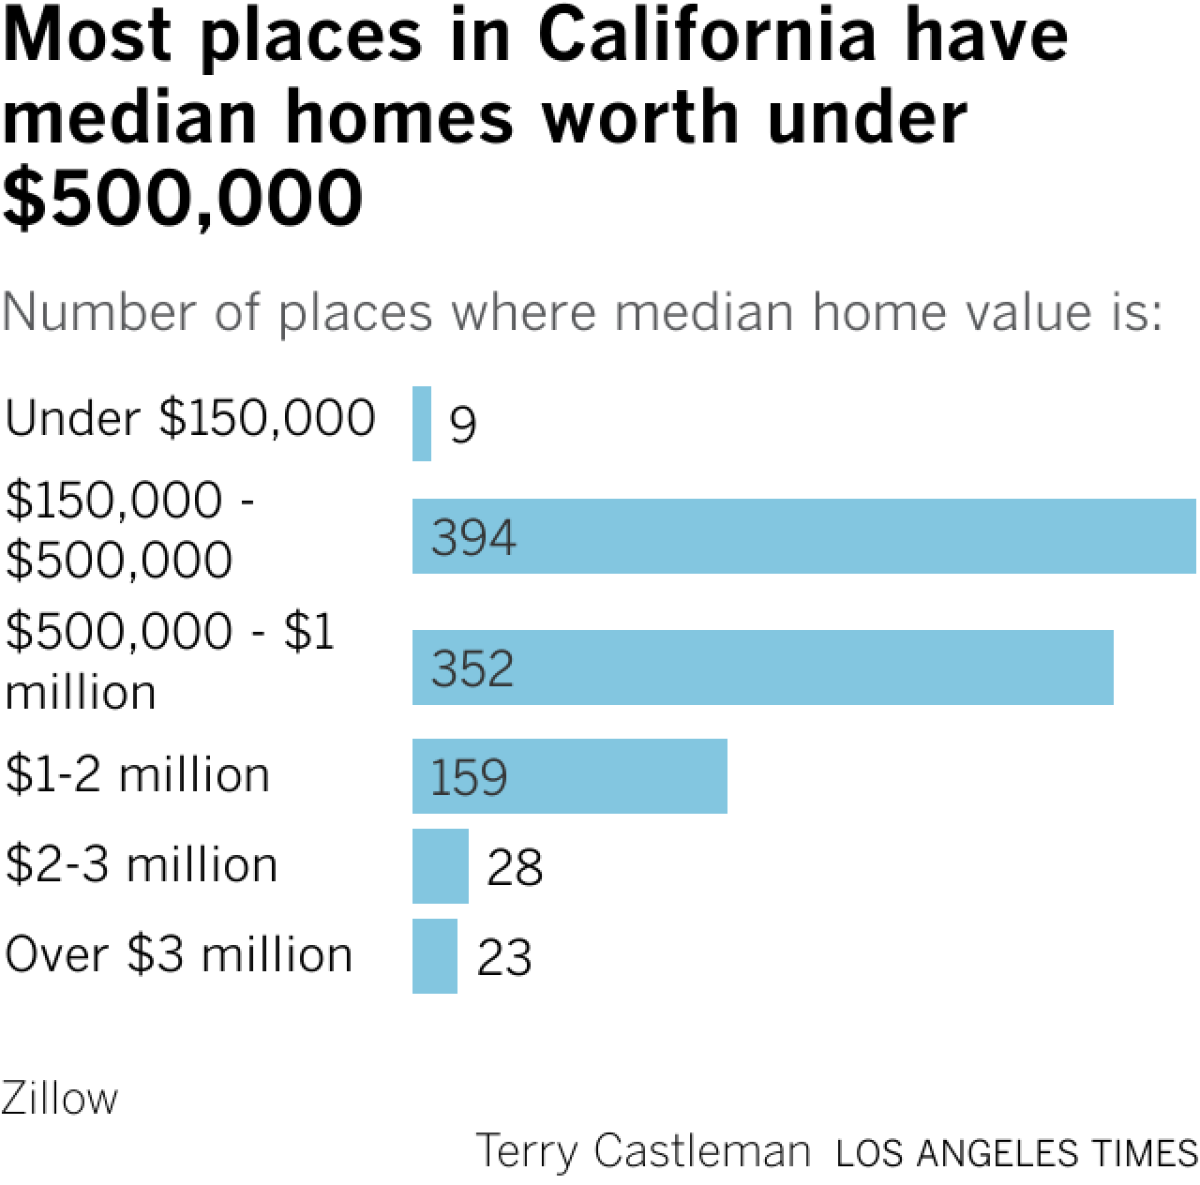 Chart showing that most places in California have median home values between $150,000 and $500,000.